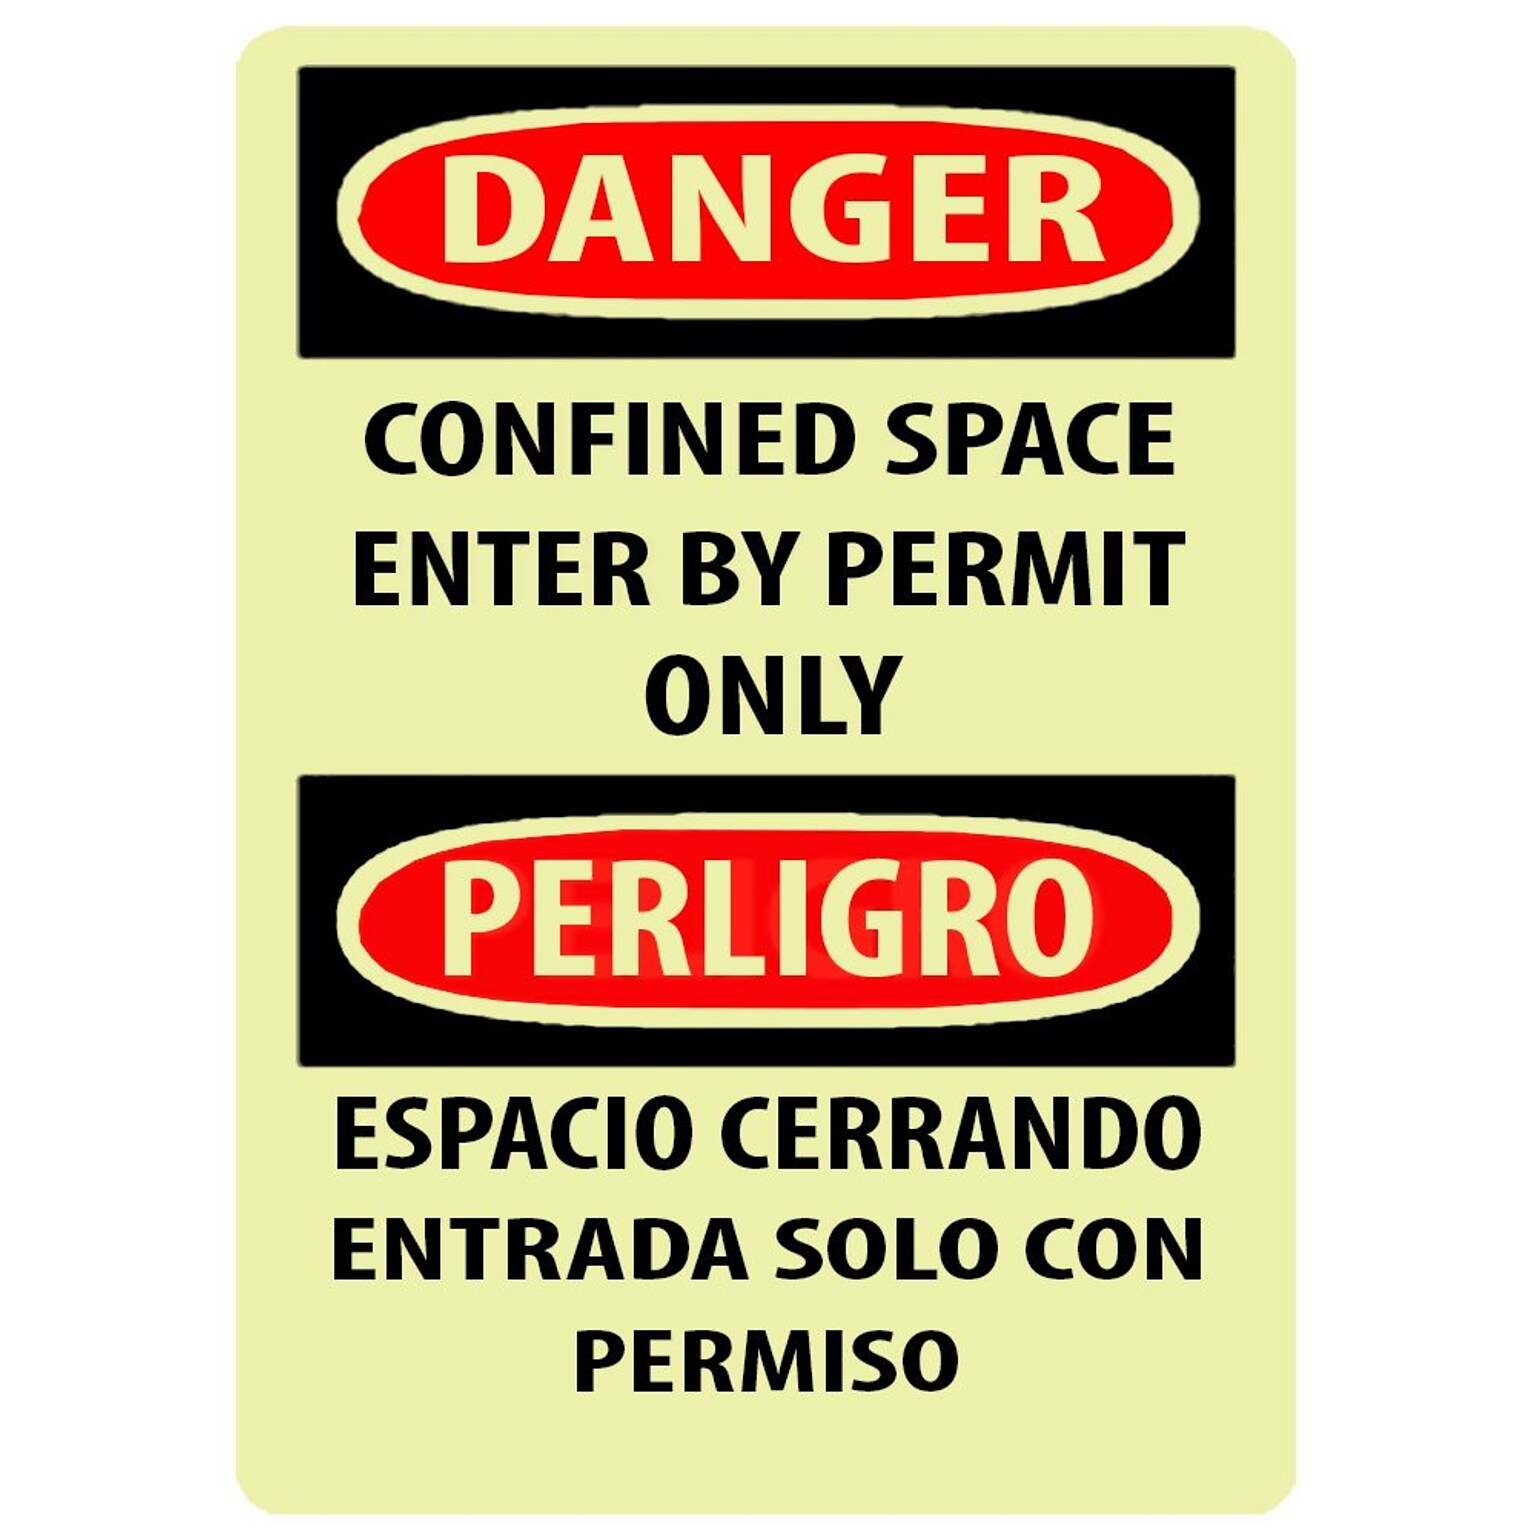 Danger, Confined Space Enter By Permit Only, Bilingual, 14X10, Adhesive Glo Vinyl